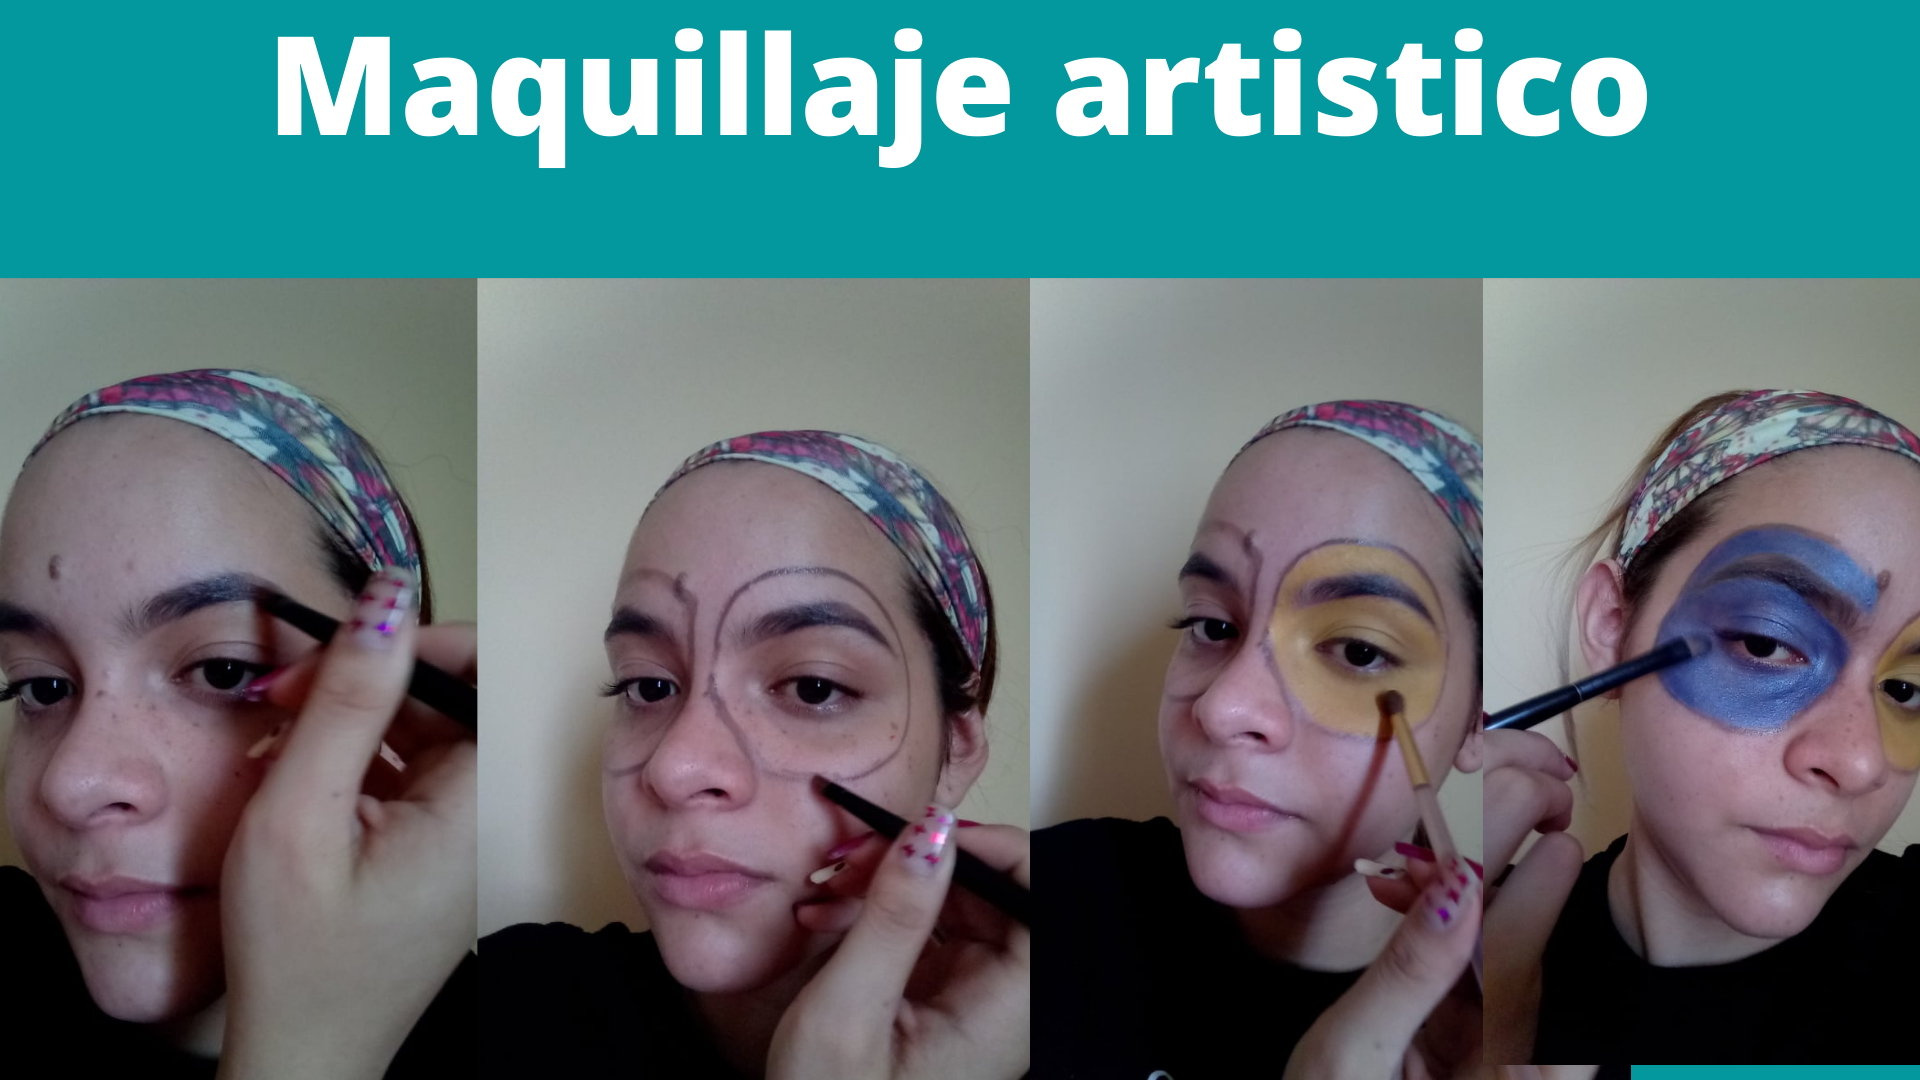 Maquillaje artistico (1).png